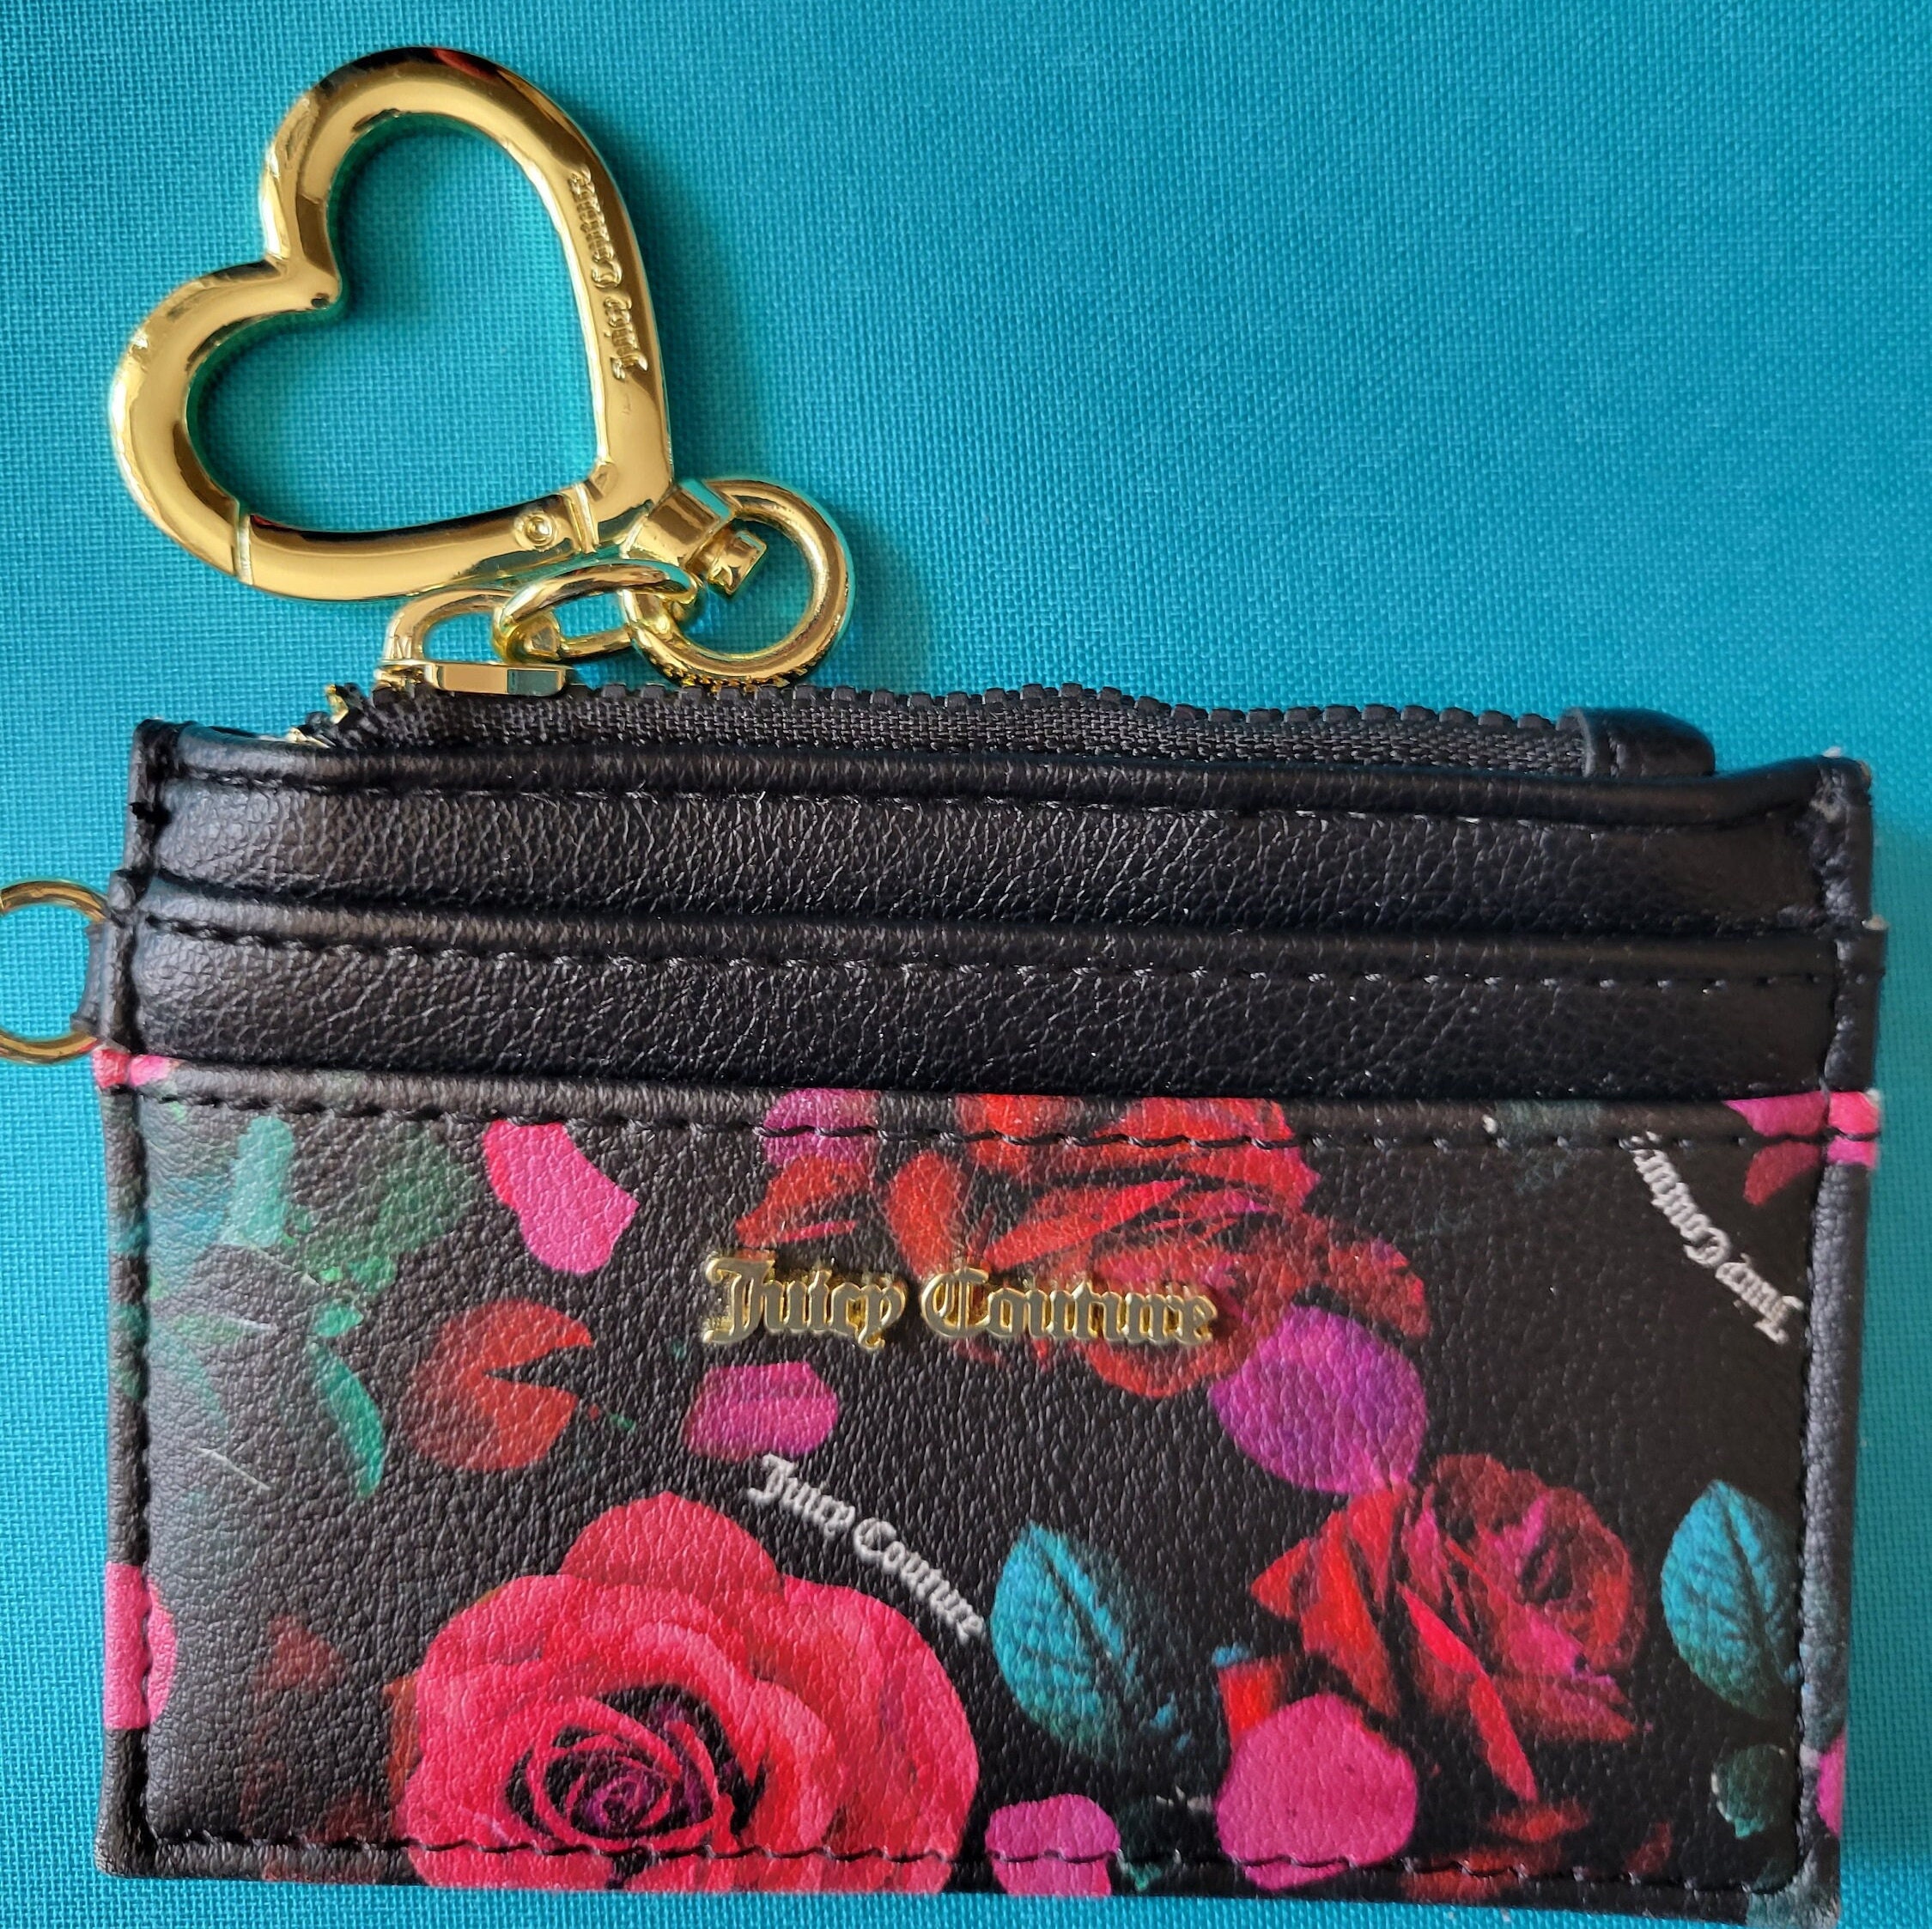 Juicy Couture Juicy coin purse - $17 New With Tags - From Kelly